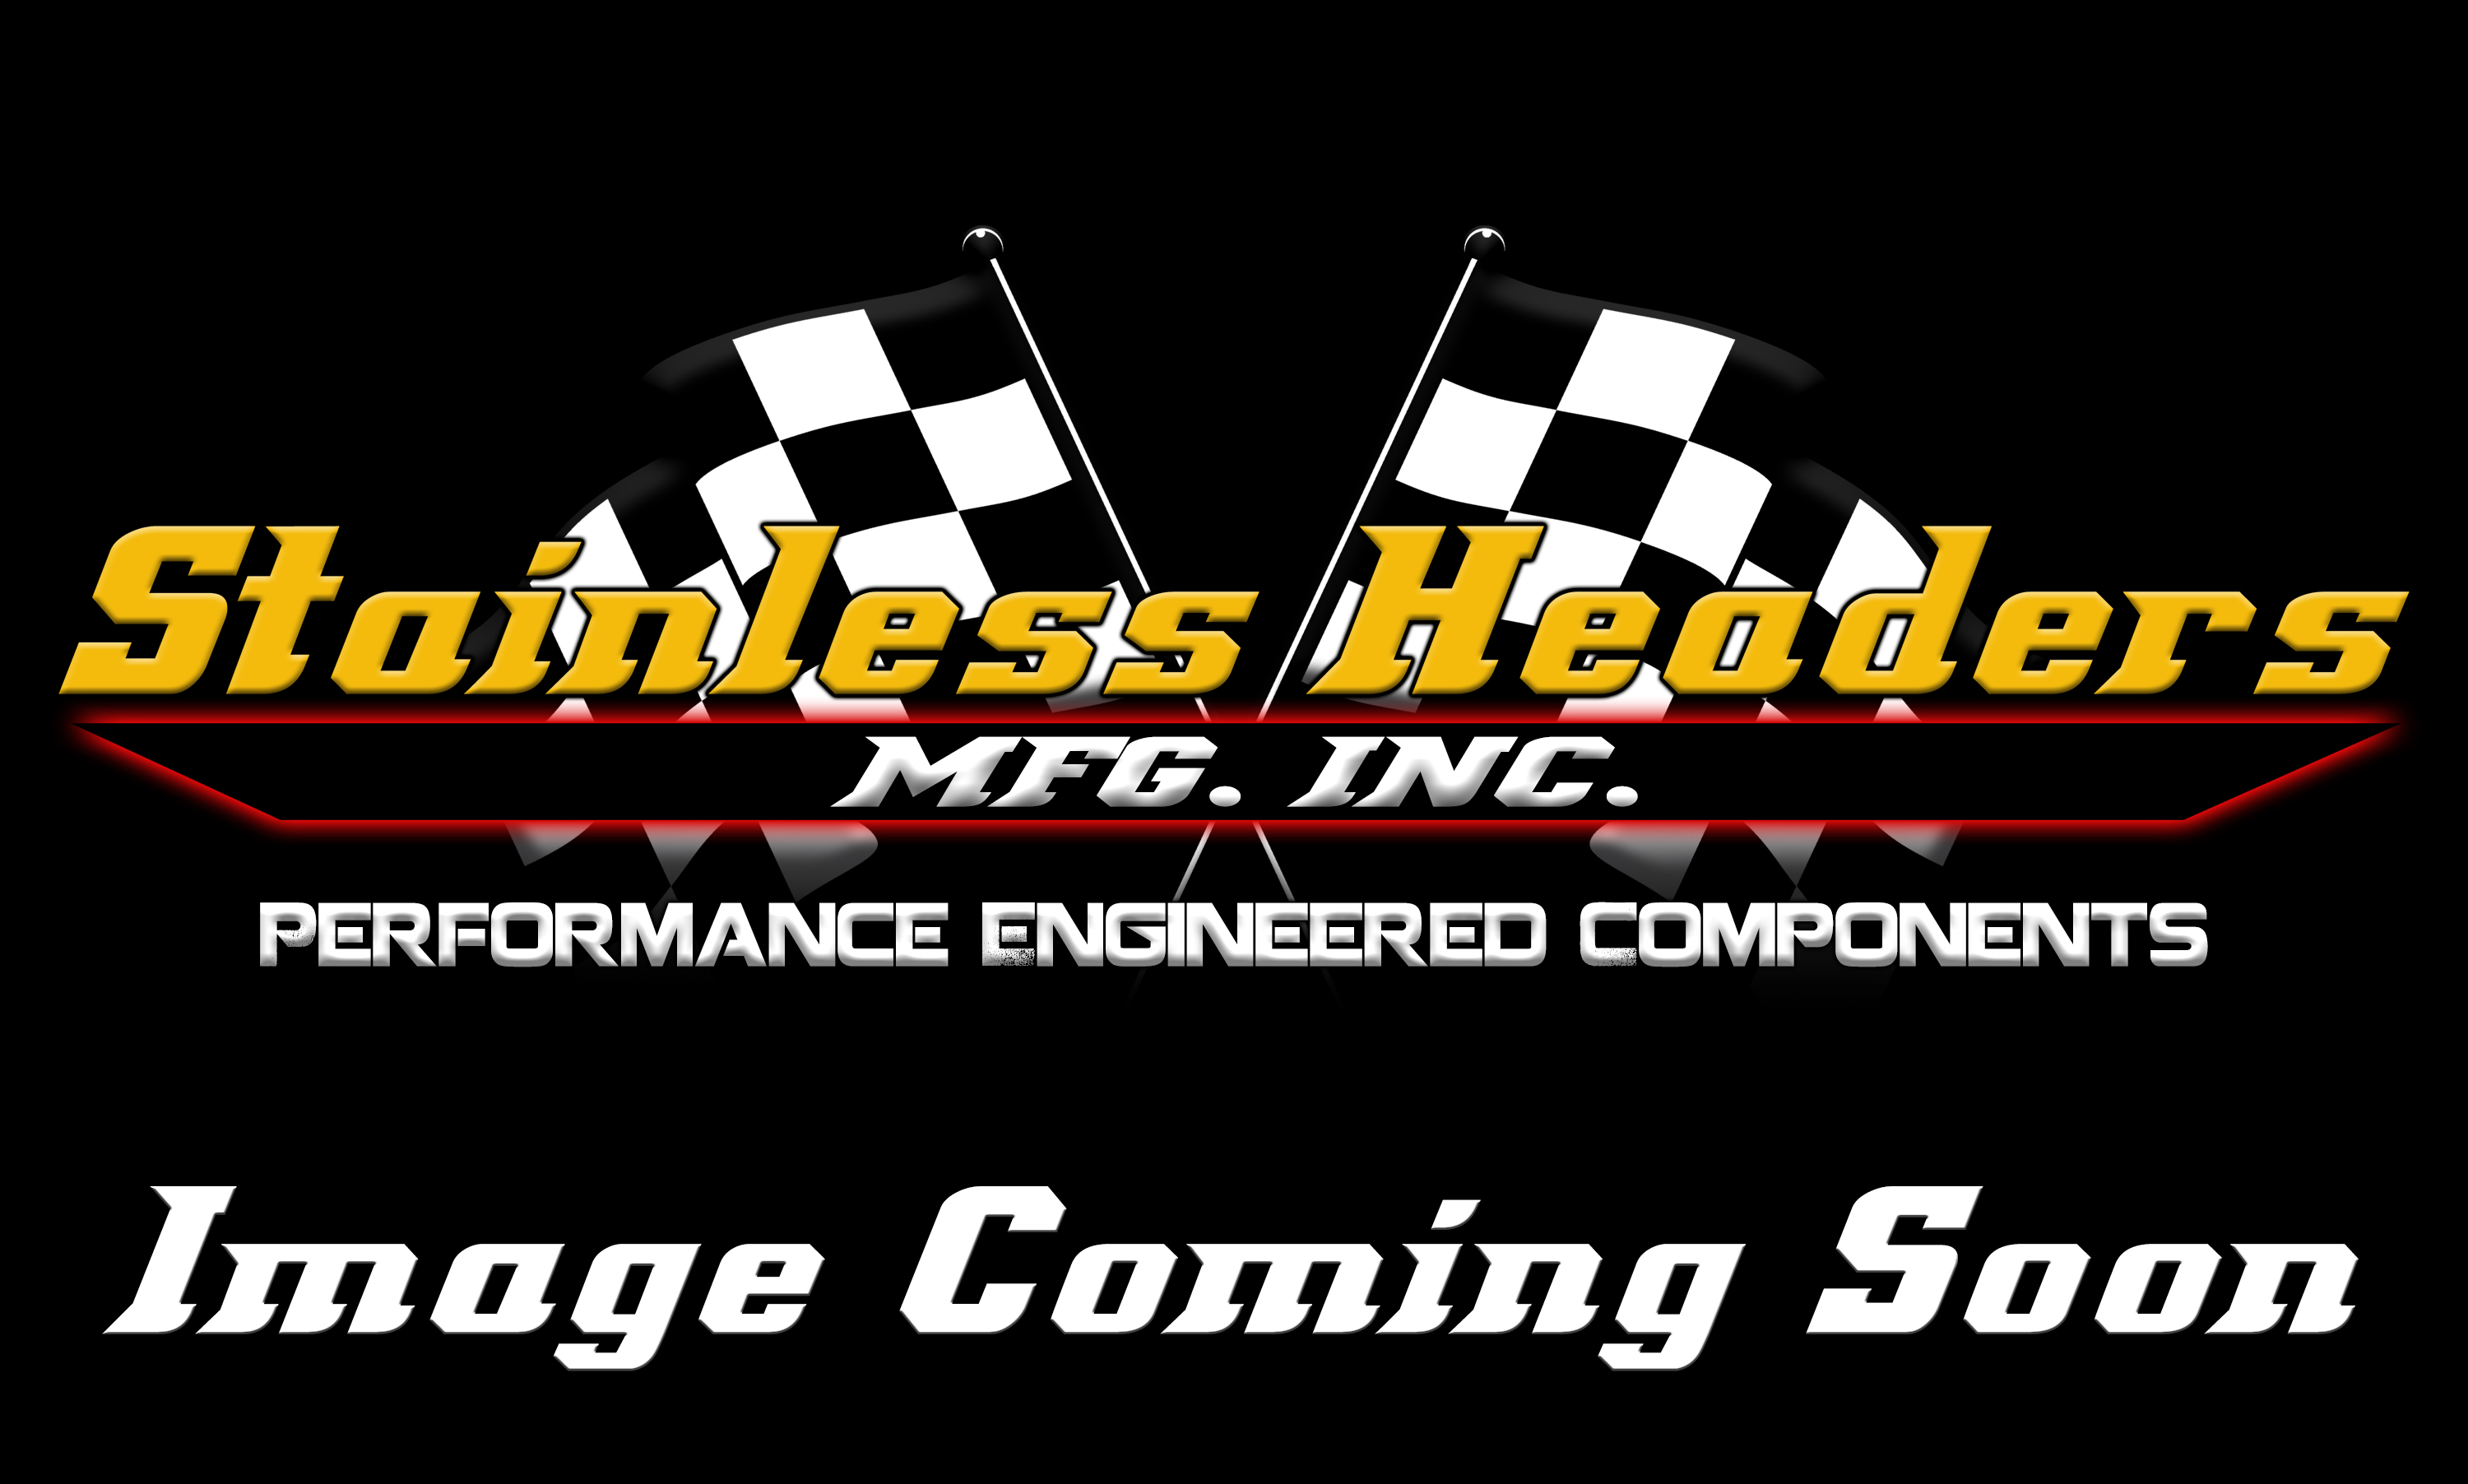 Merge Collectors - 321 Stainless Steel Merge Collectors - Stainless Headers - 1 1/2" Primary 4 into 1 Performance Merge Collector-16ga 321ss